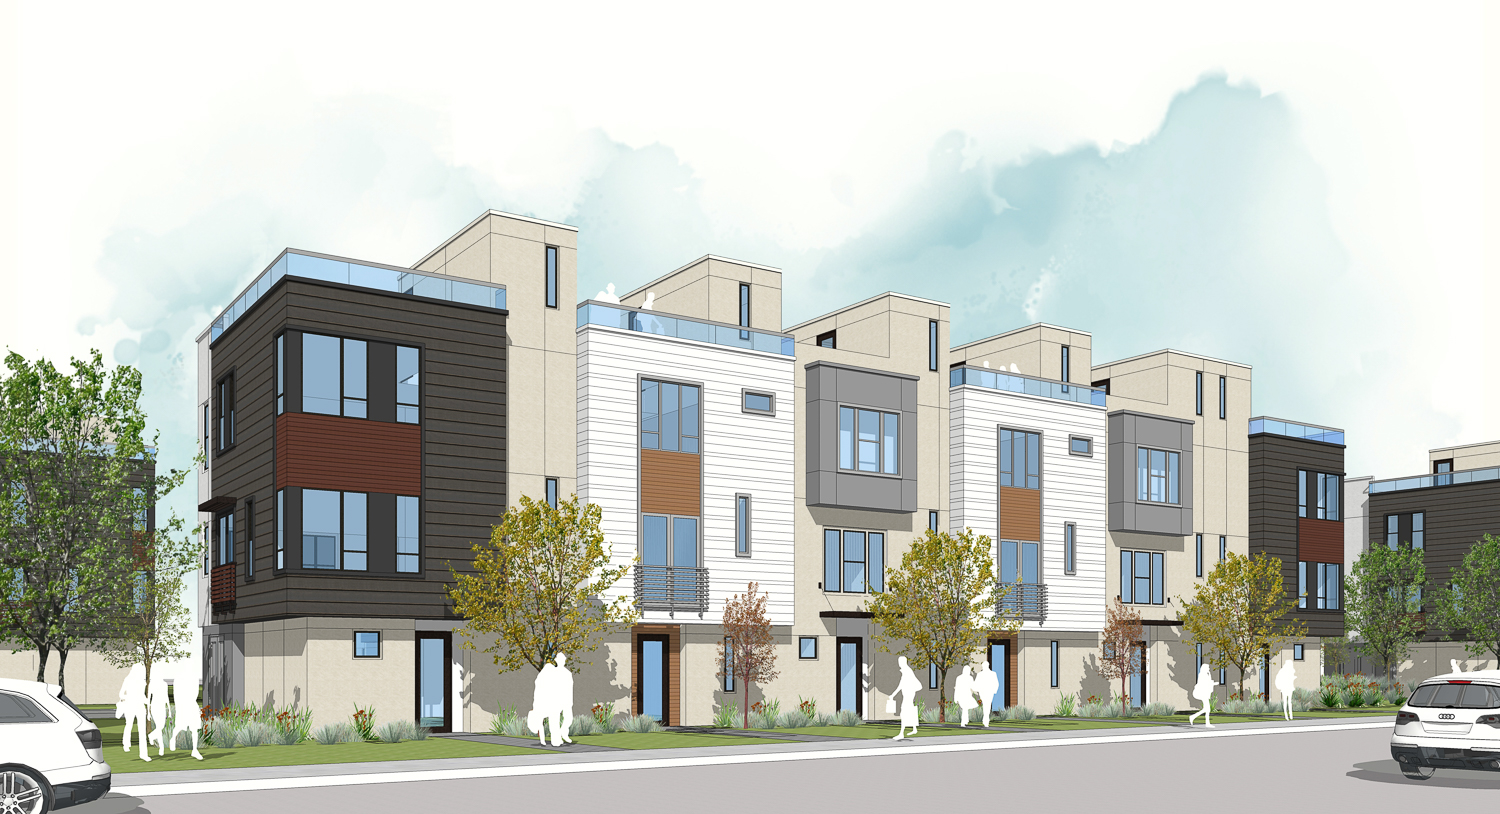 University Station development townhomes view, rendering by KTGY